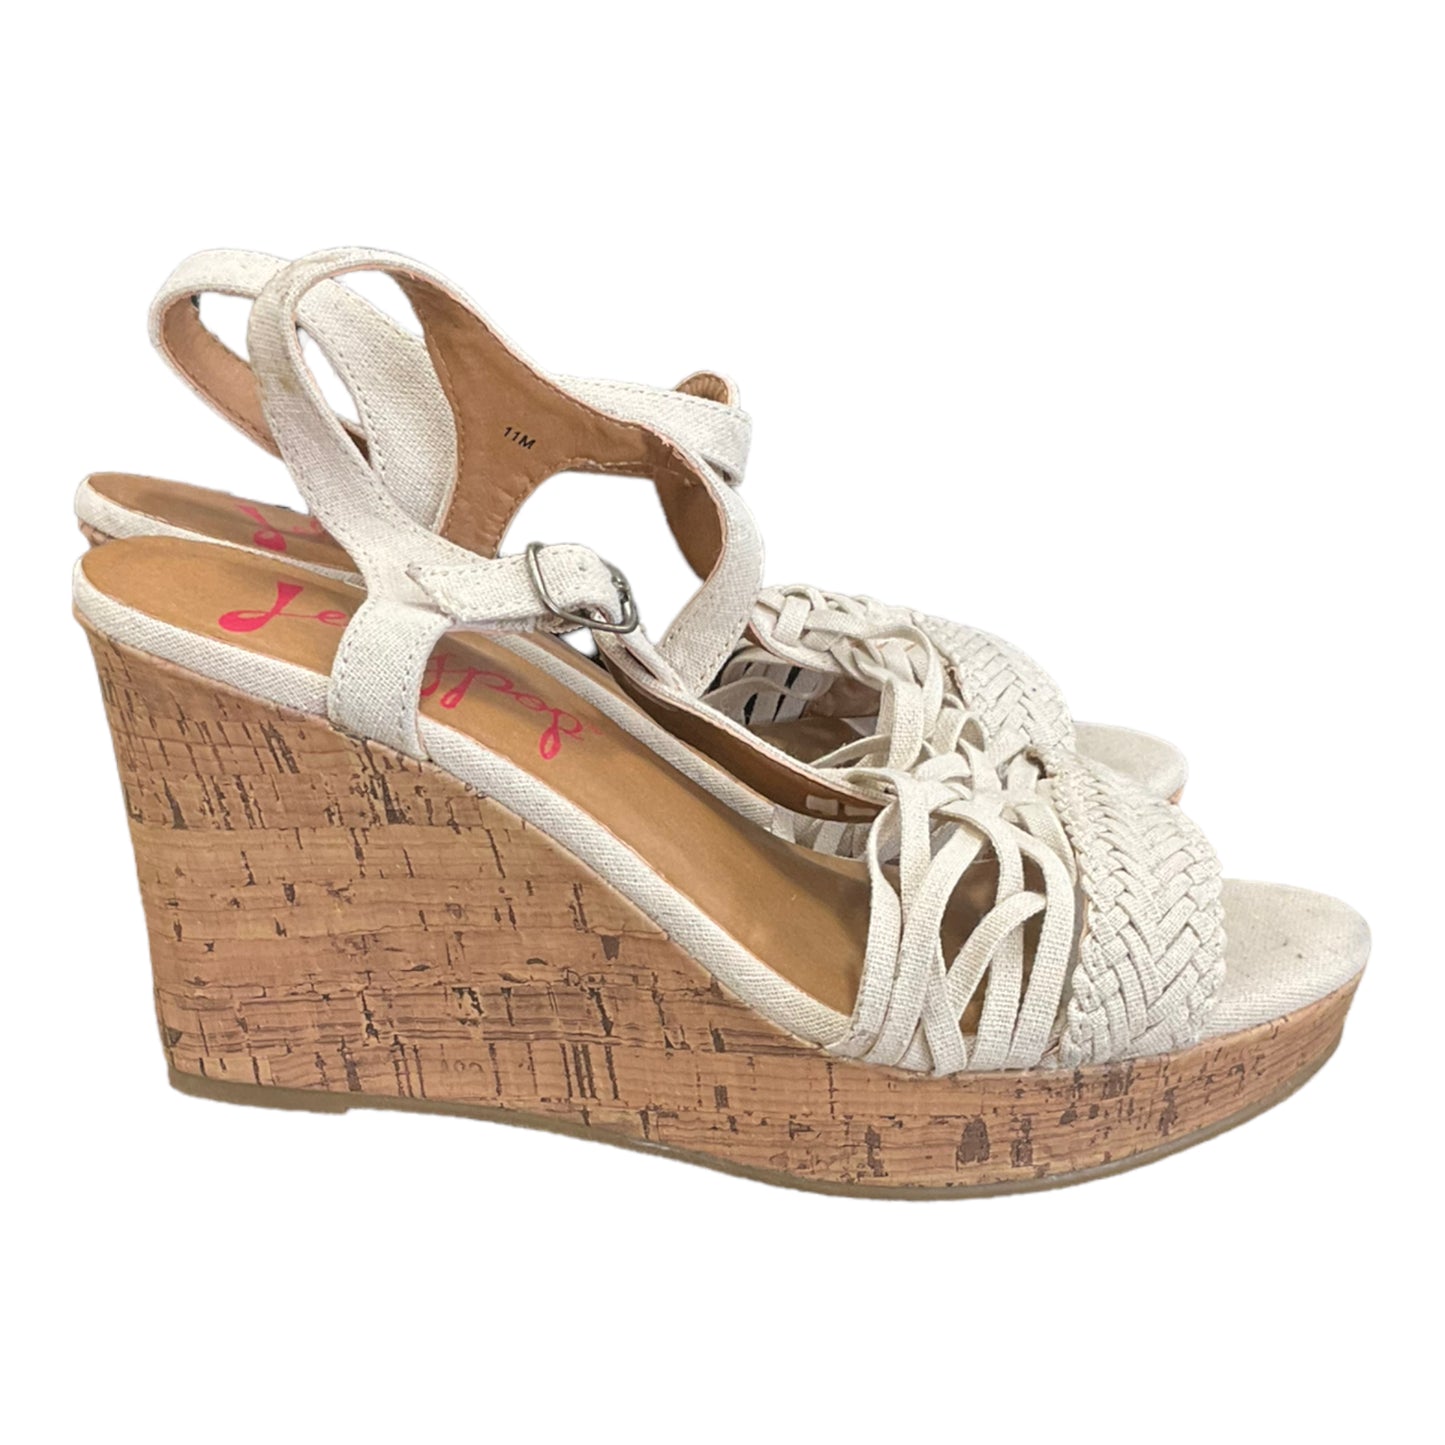 Sandals Heels Wedge By Jelly Pop  Size: 11